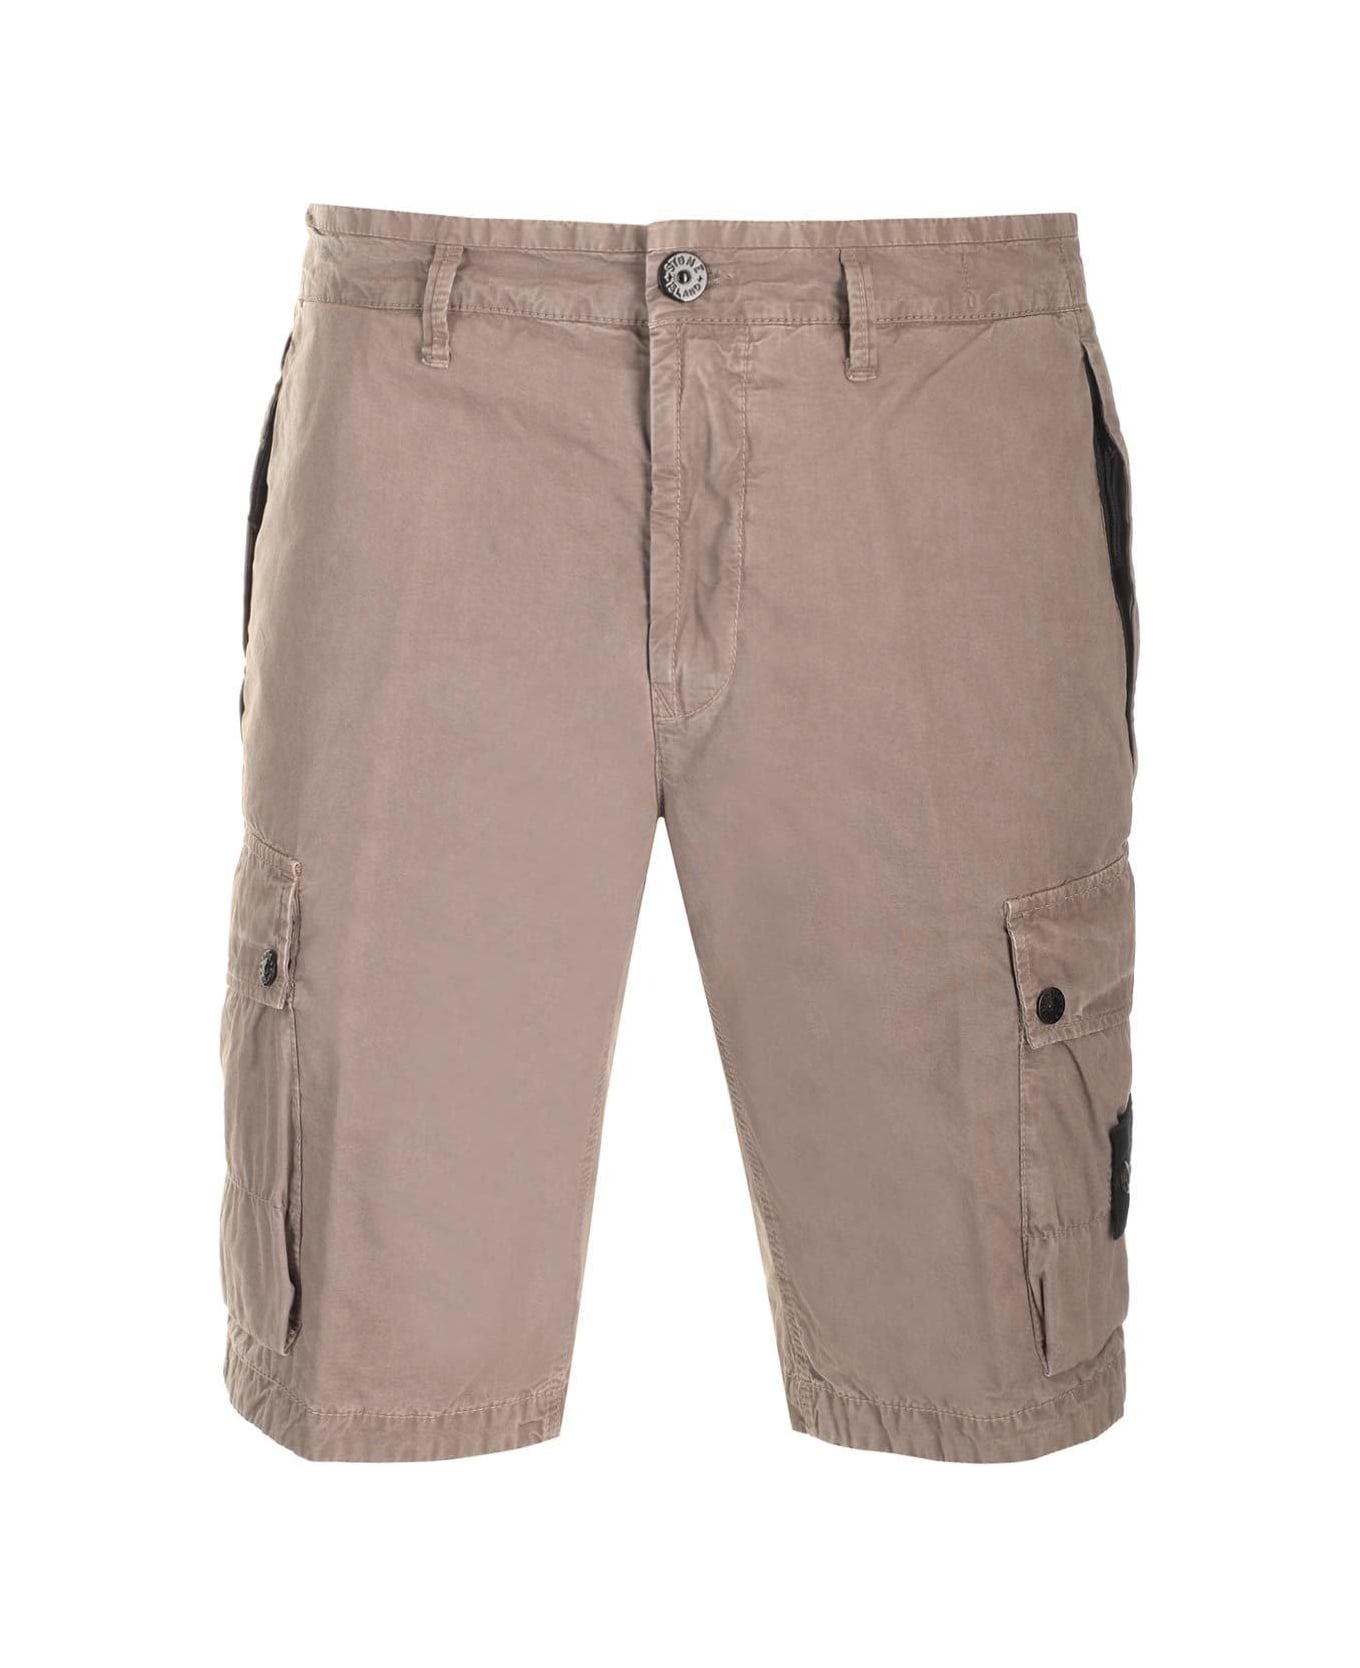 Stone Island Logo Patch Knee-high Shorts - Brown